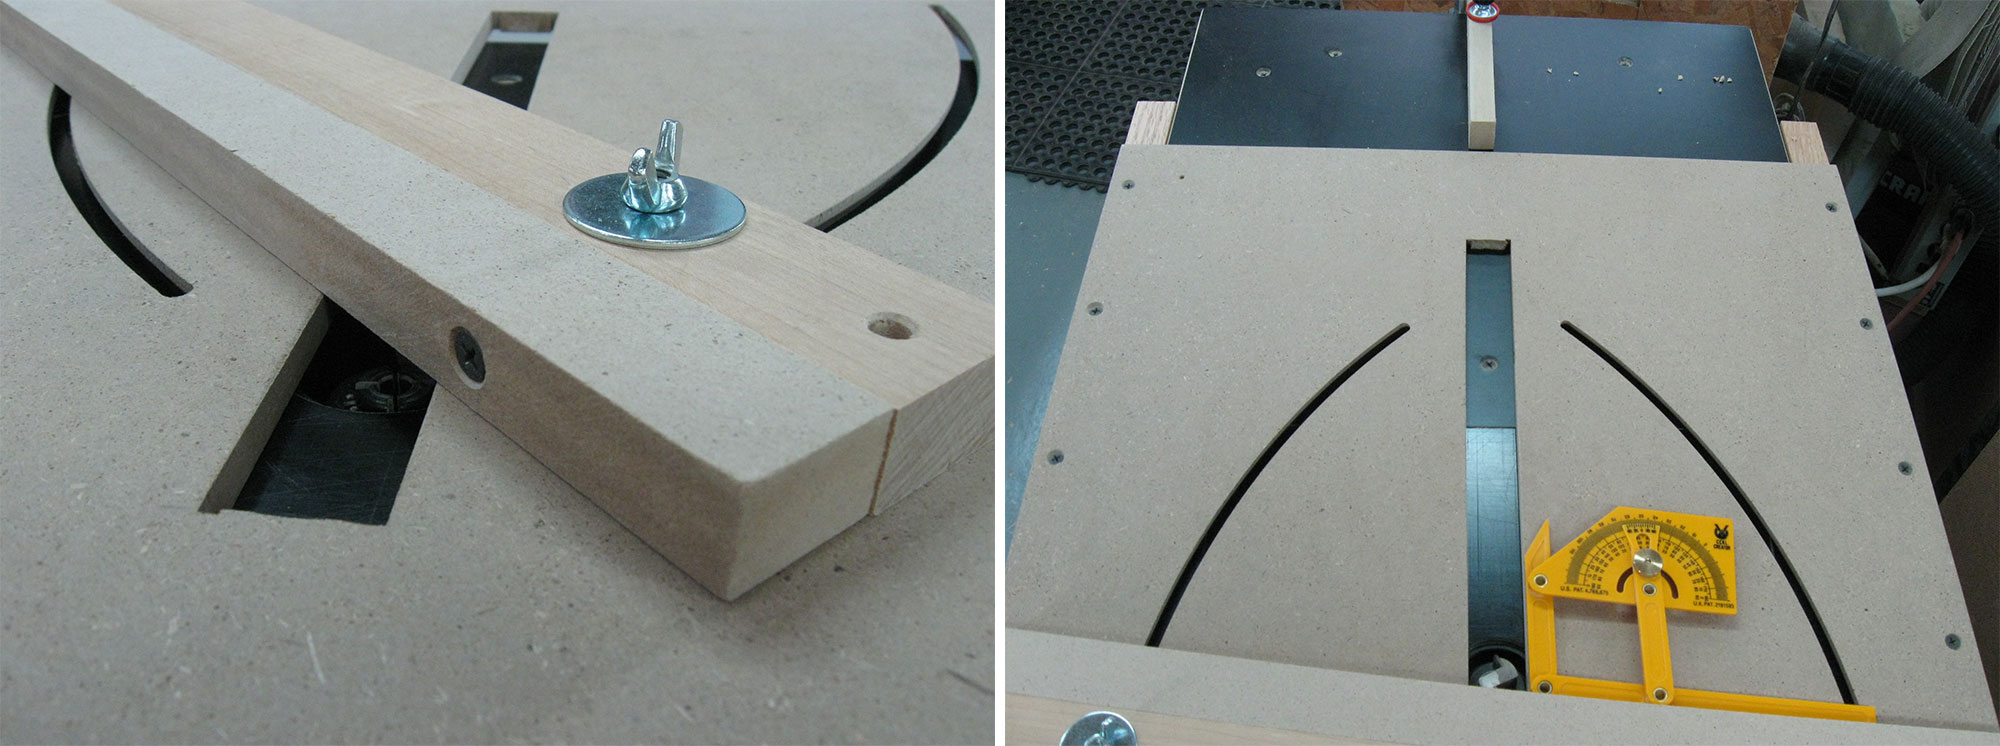 Left: Adding a sacrificial pad. Right: Setting the angle using a protractor.